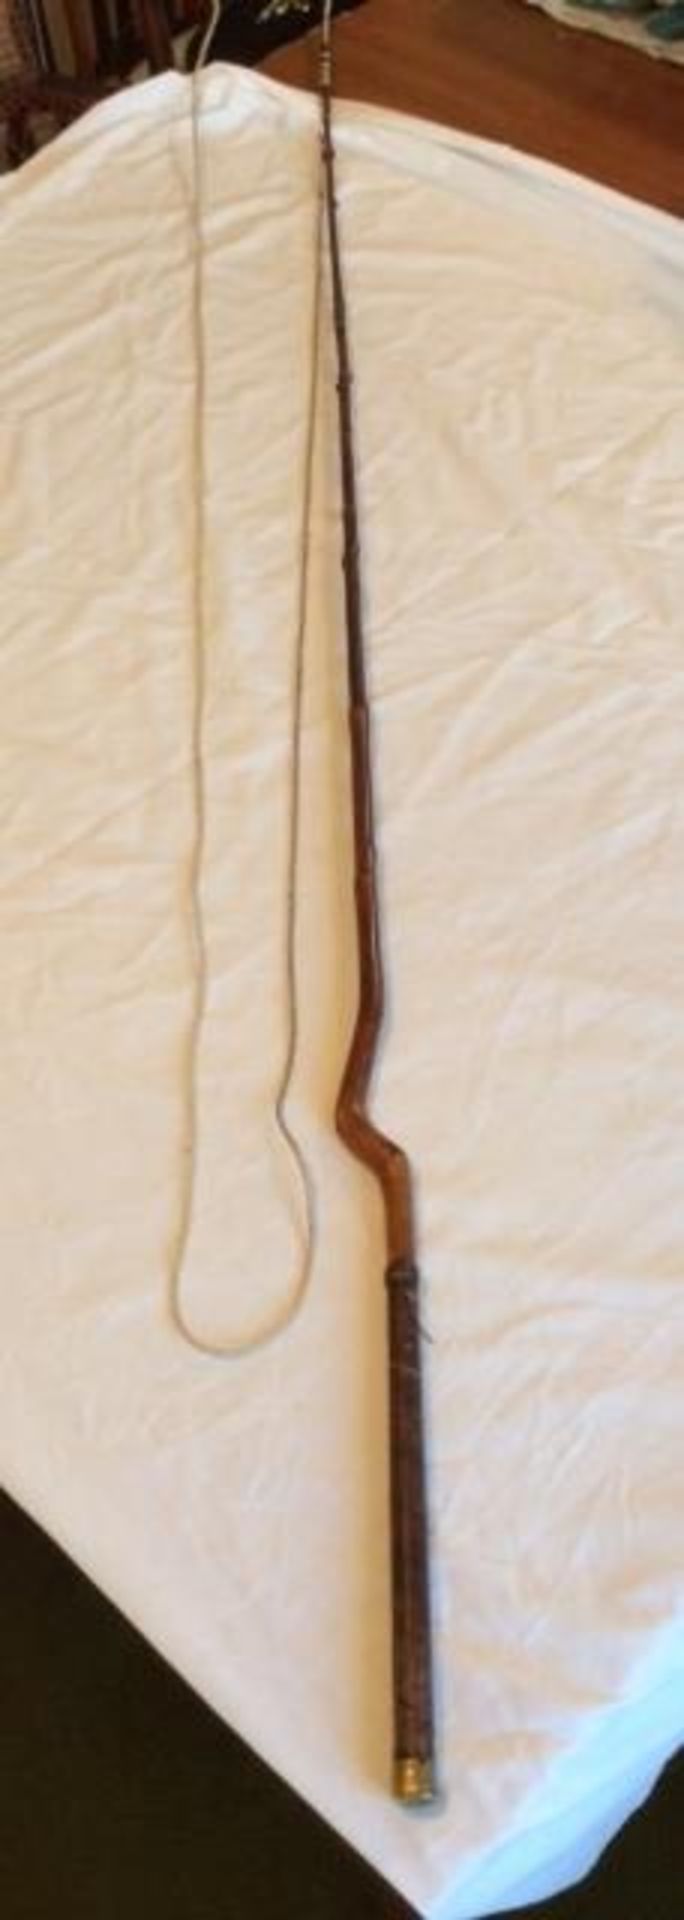 Dog leg coaching whip with spiral leather handle. Approx. 5ft long (view in security pen)